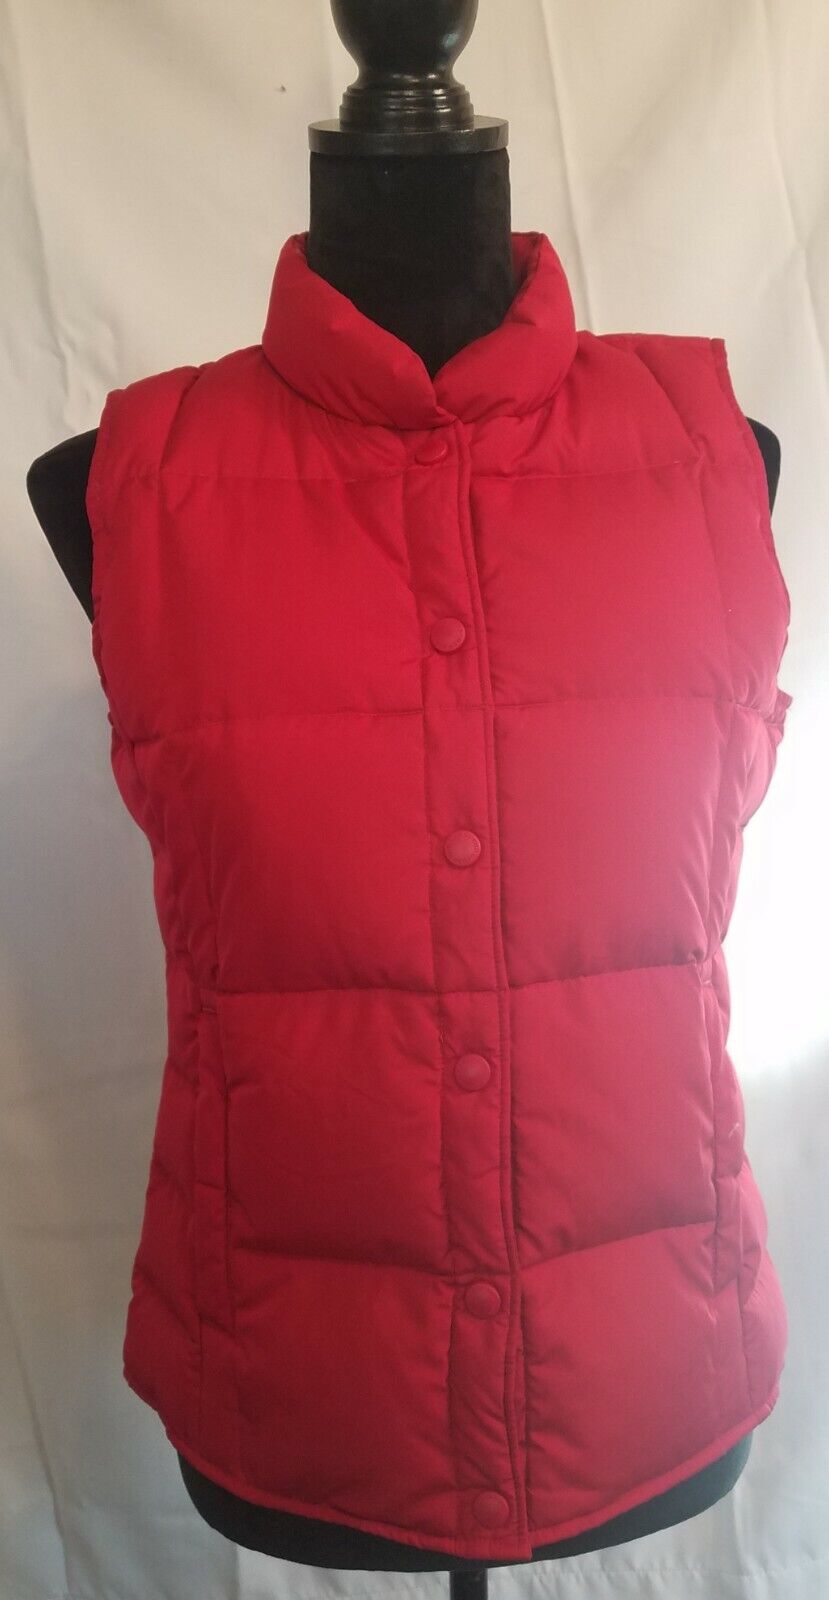 LAND'S END GOOSEDOWN VEST - Sz Large 14 Youth great condition